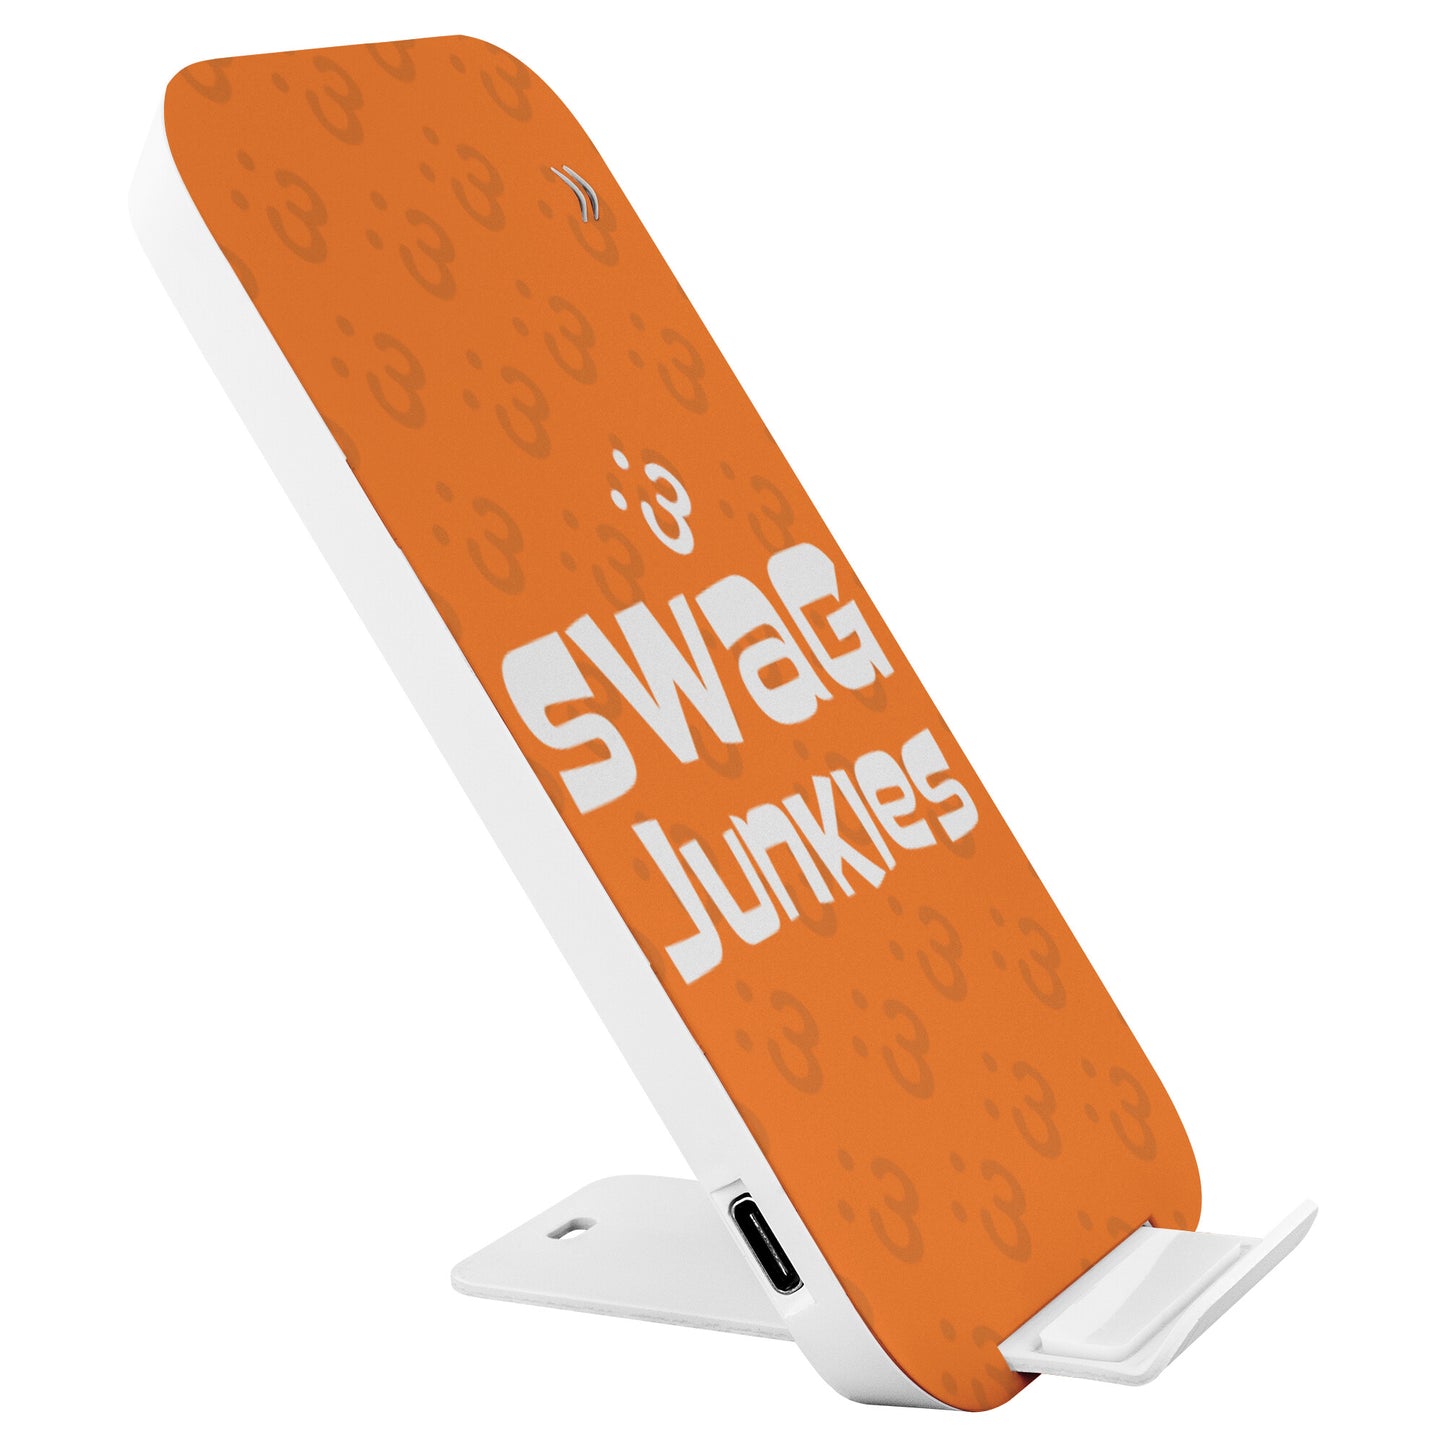 Swag Junkies Wireless Charging Stand